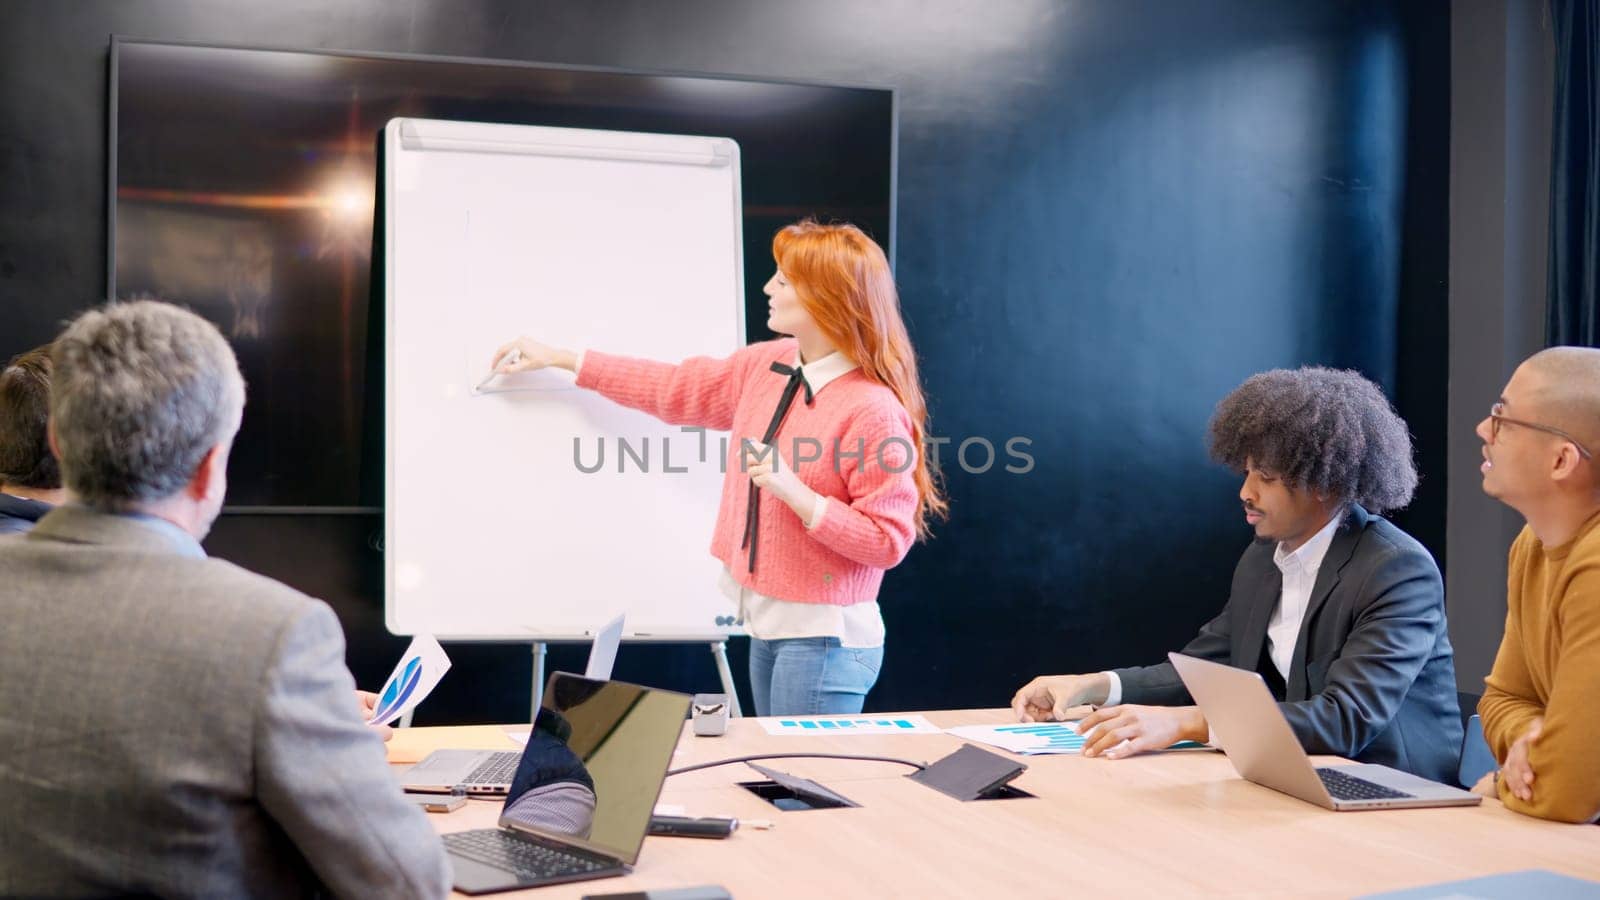 Woman using white board during a presentation of a project in a coworking space